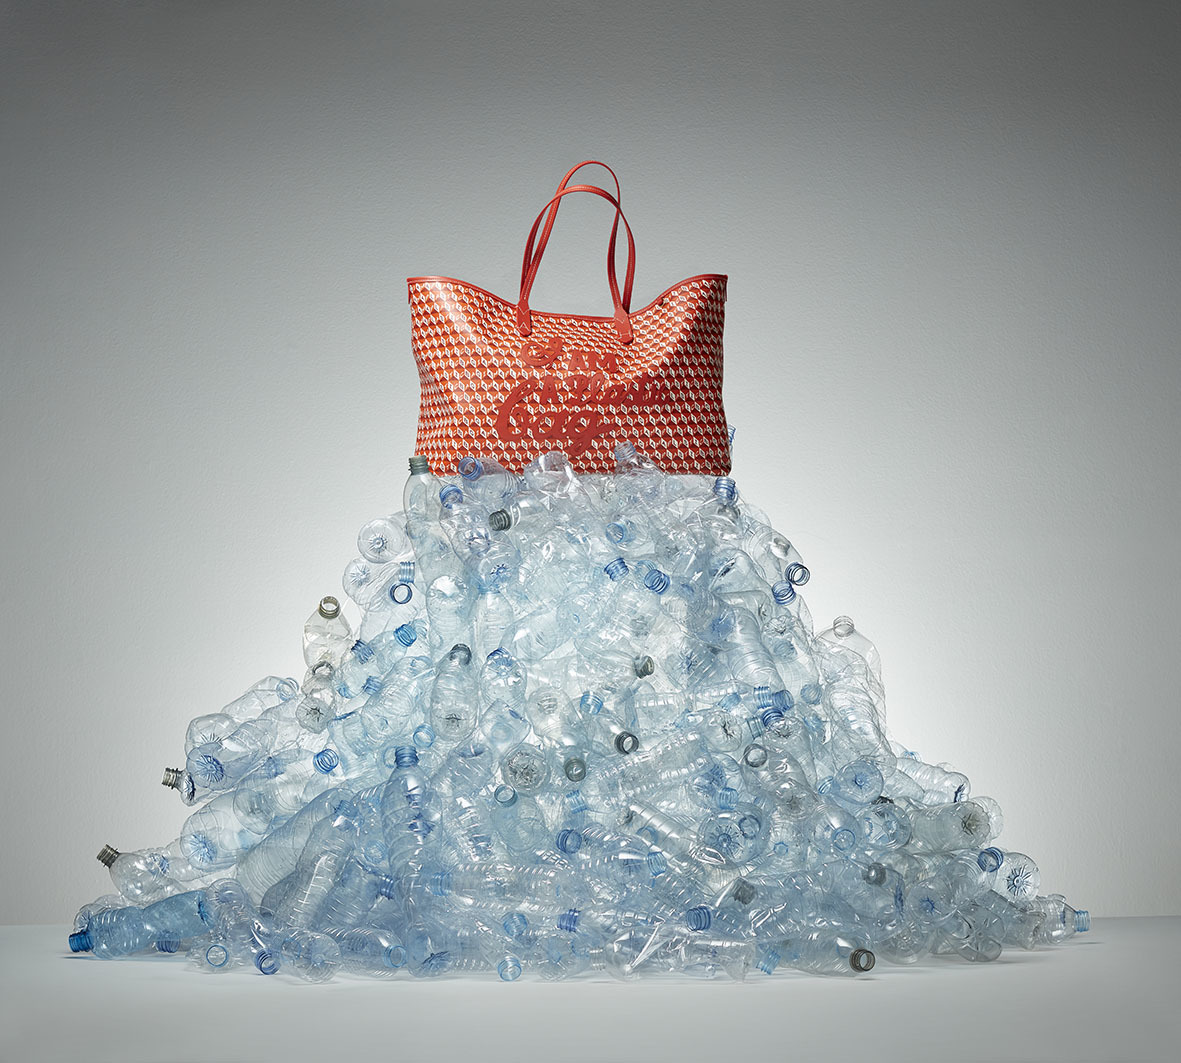 The Handbag made from Plastic Bags